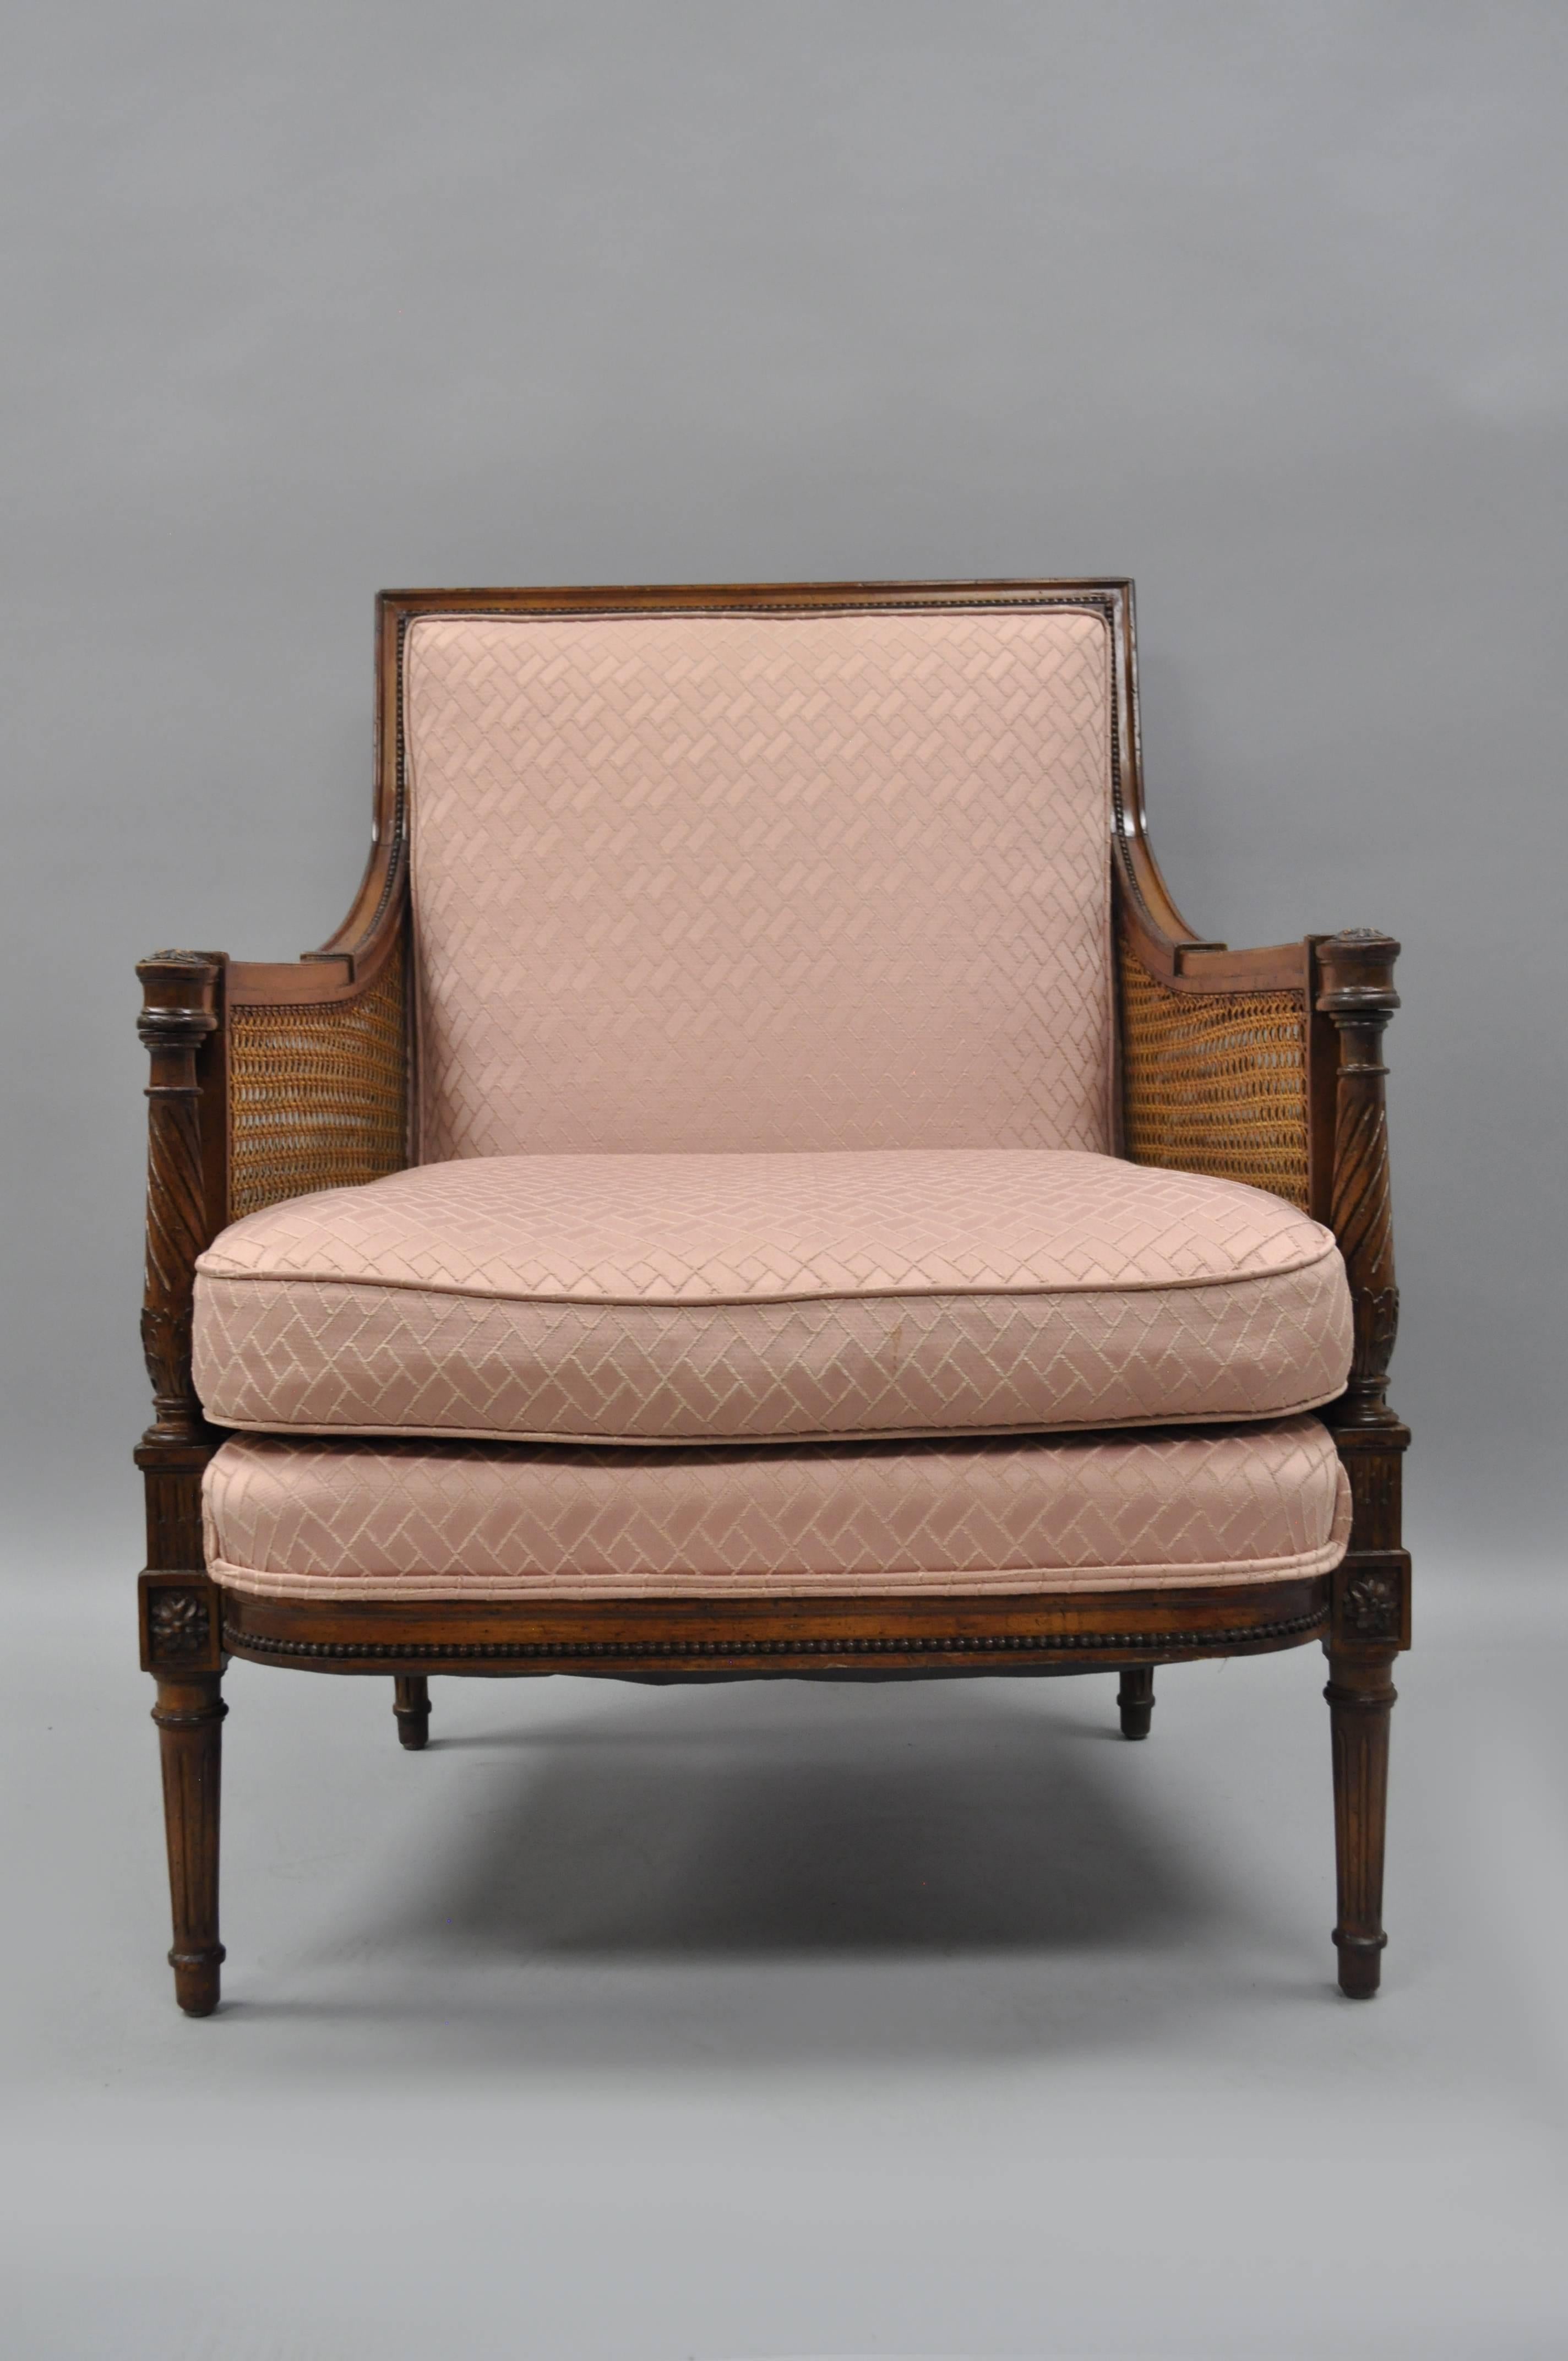 Vintage French Louis XVI / Directoire style cane Bergere armchair. Item features double cane sides, spiral carved supports, reeded and tapered legs, tight upholstered square back with loose seat cushion, and classic Louis XVI form.